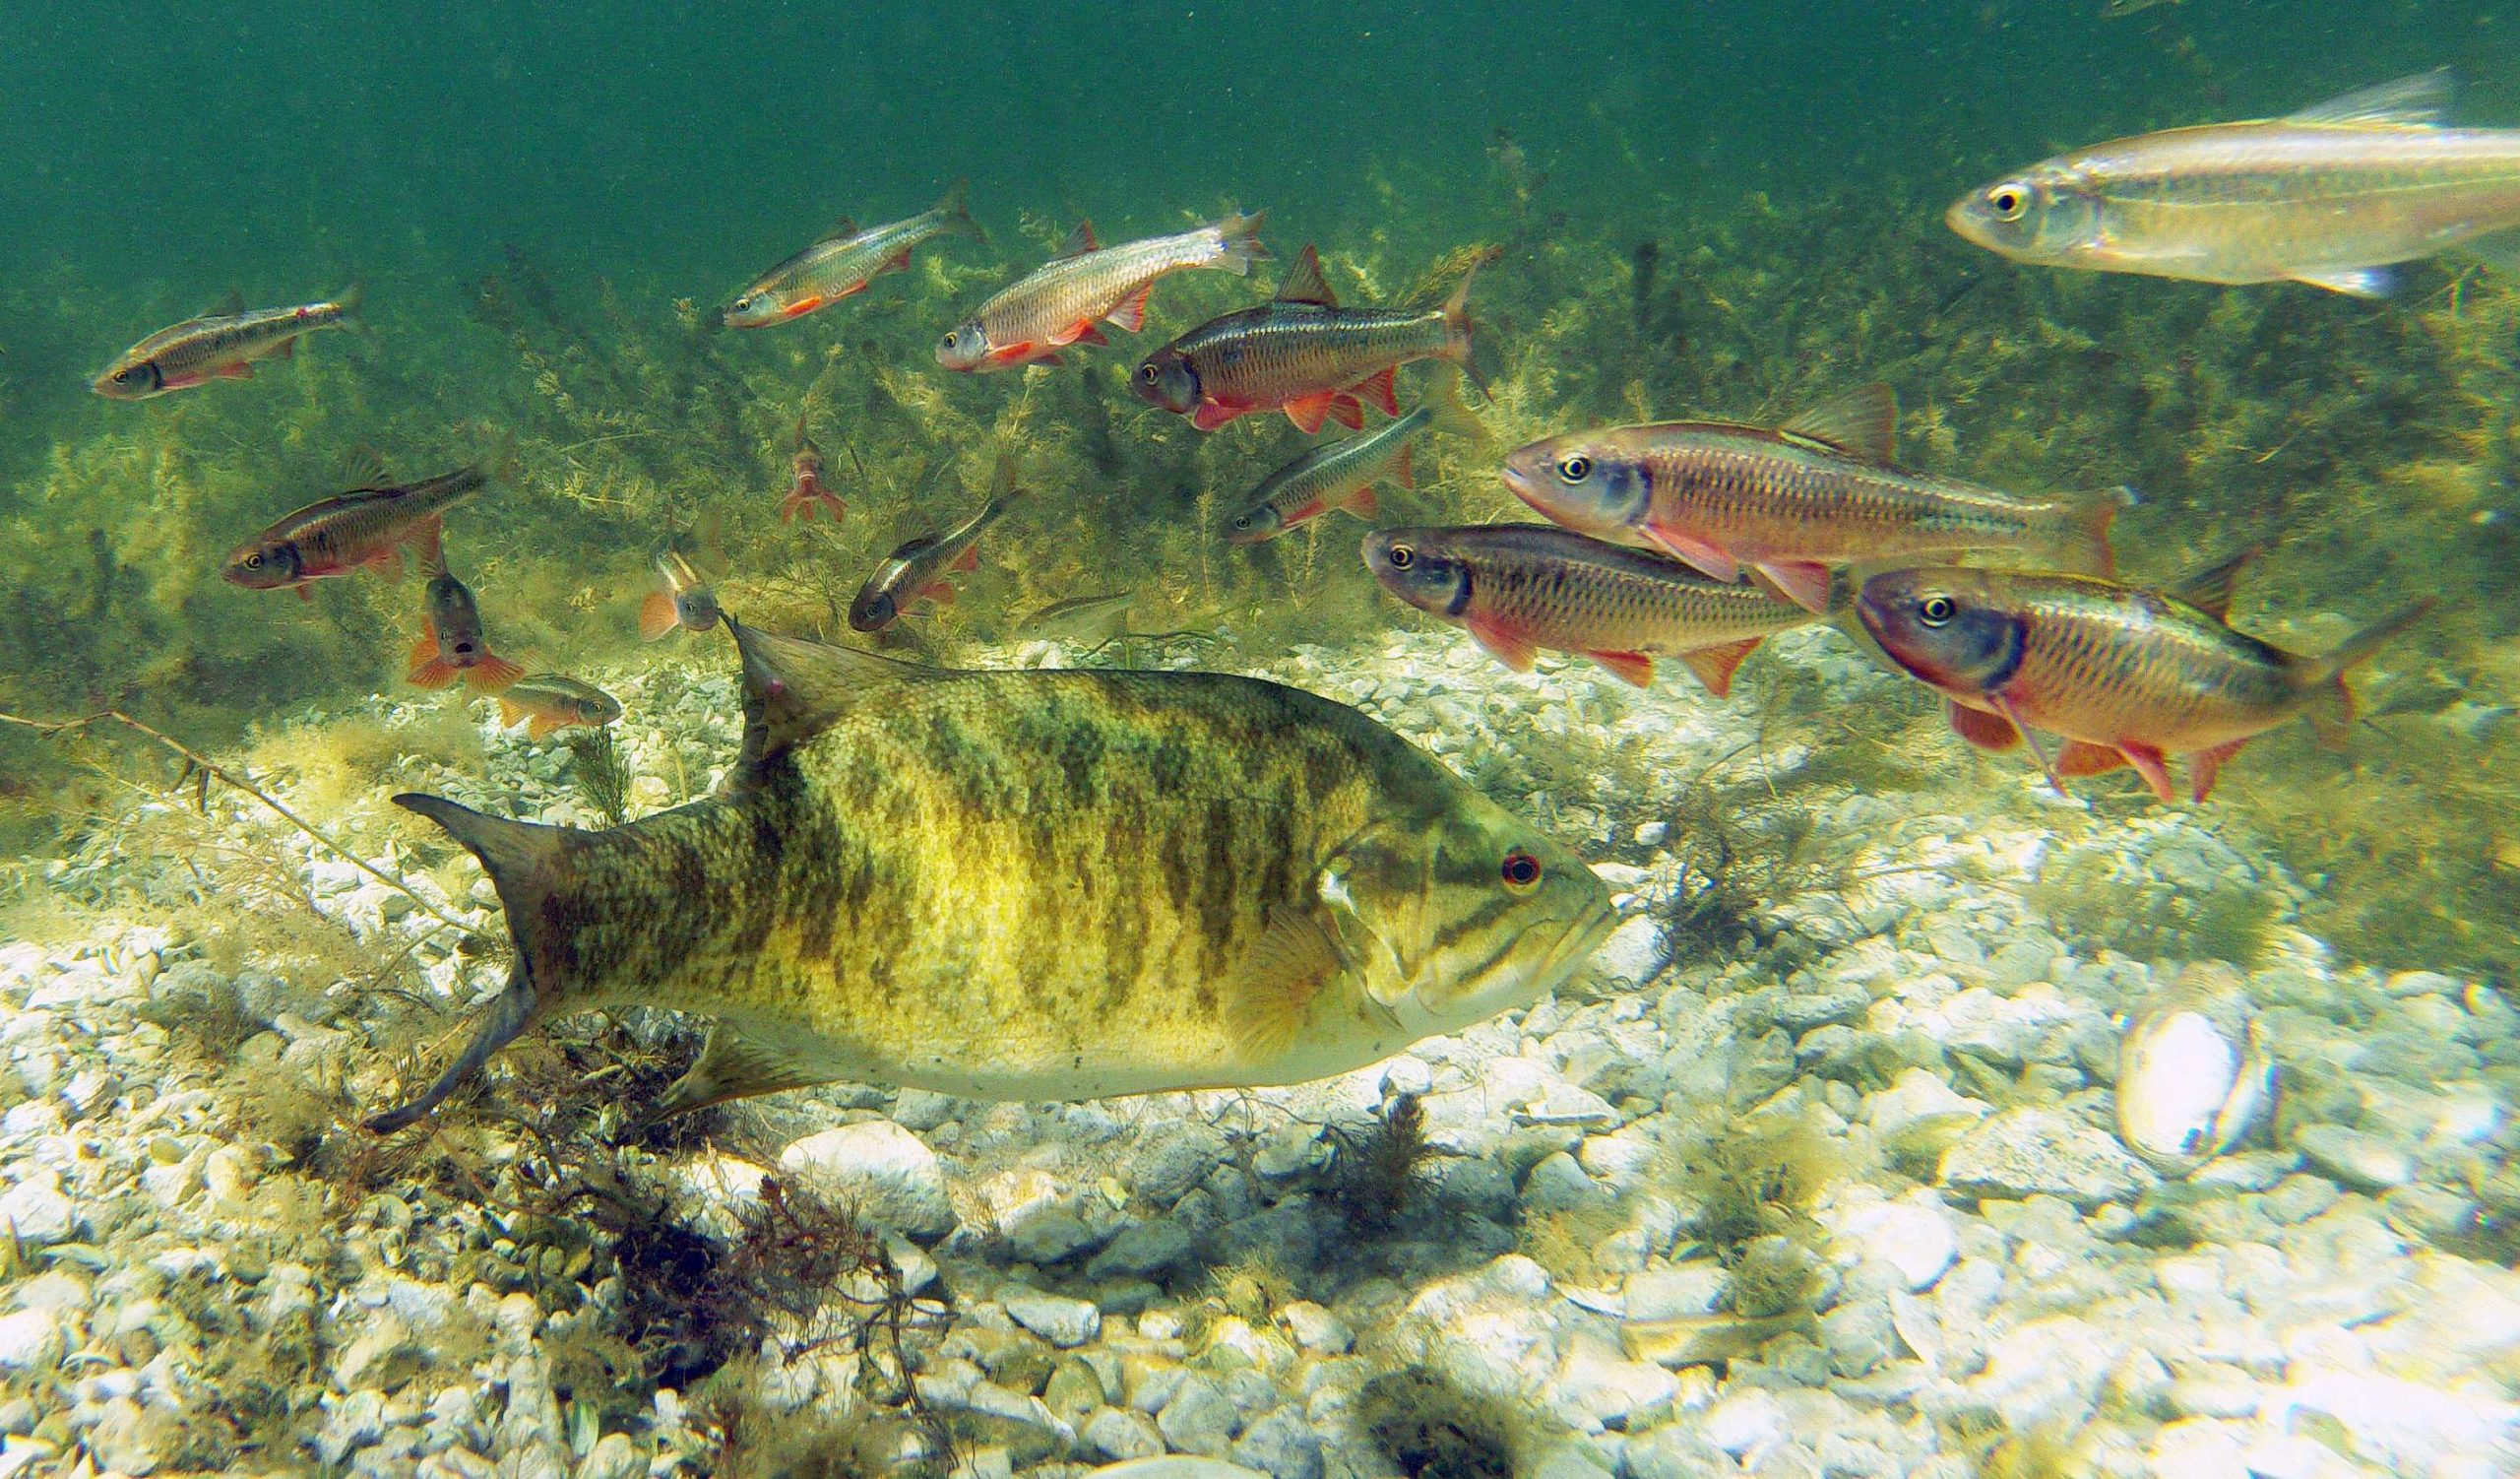 Common shiners will eat eggs, but in this photo, shiners are in prime spawning color with those vivid red fins. They are likely also looking for their own clean gravel to spawn over. The male bass will chase them away if they get too close. Four species of fish are actually around this male bass, including the emerald shiner in the top right. 